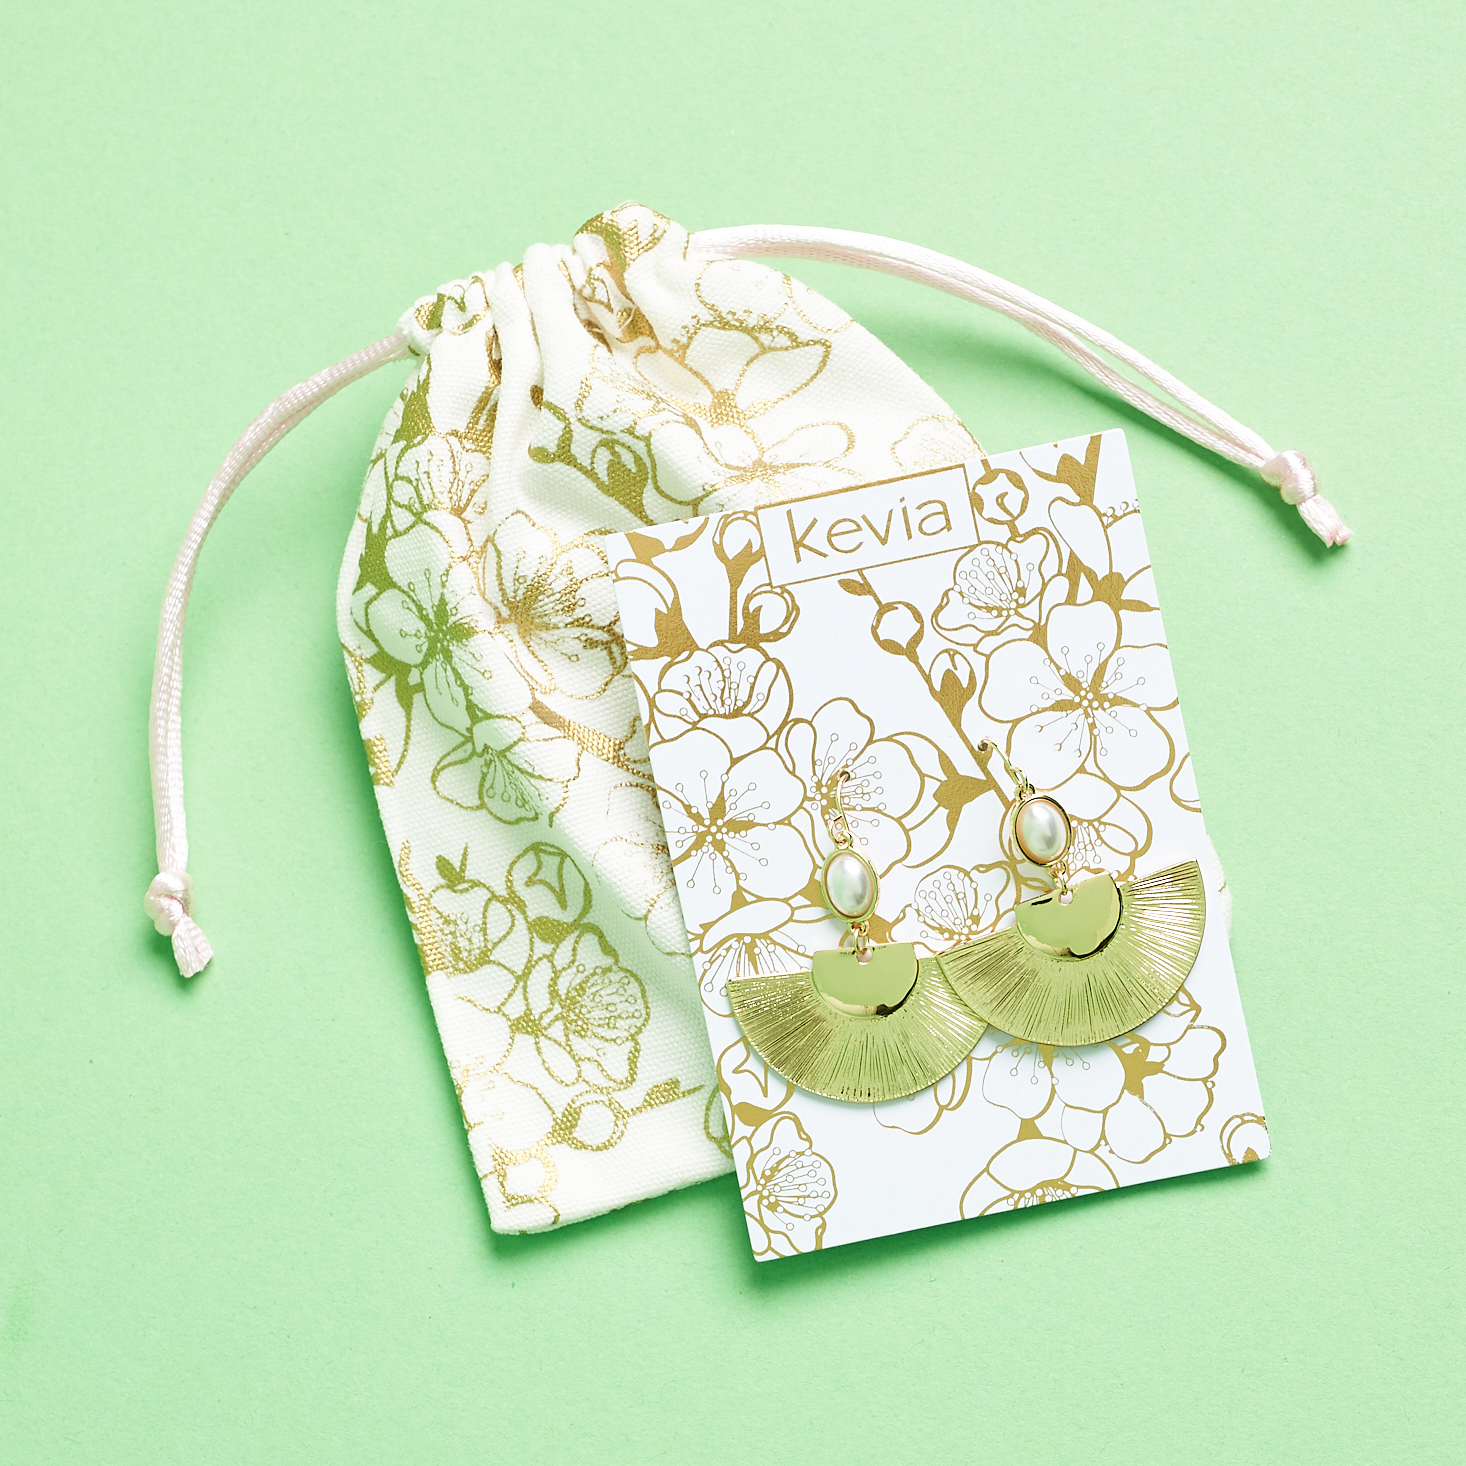 Jewelry pouch from Journee Box Kyoto